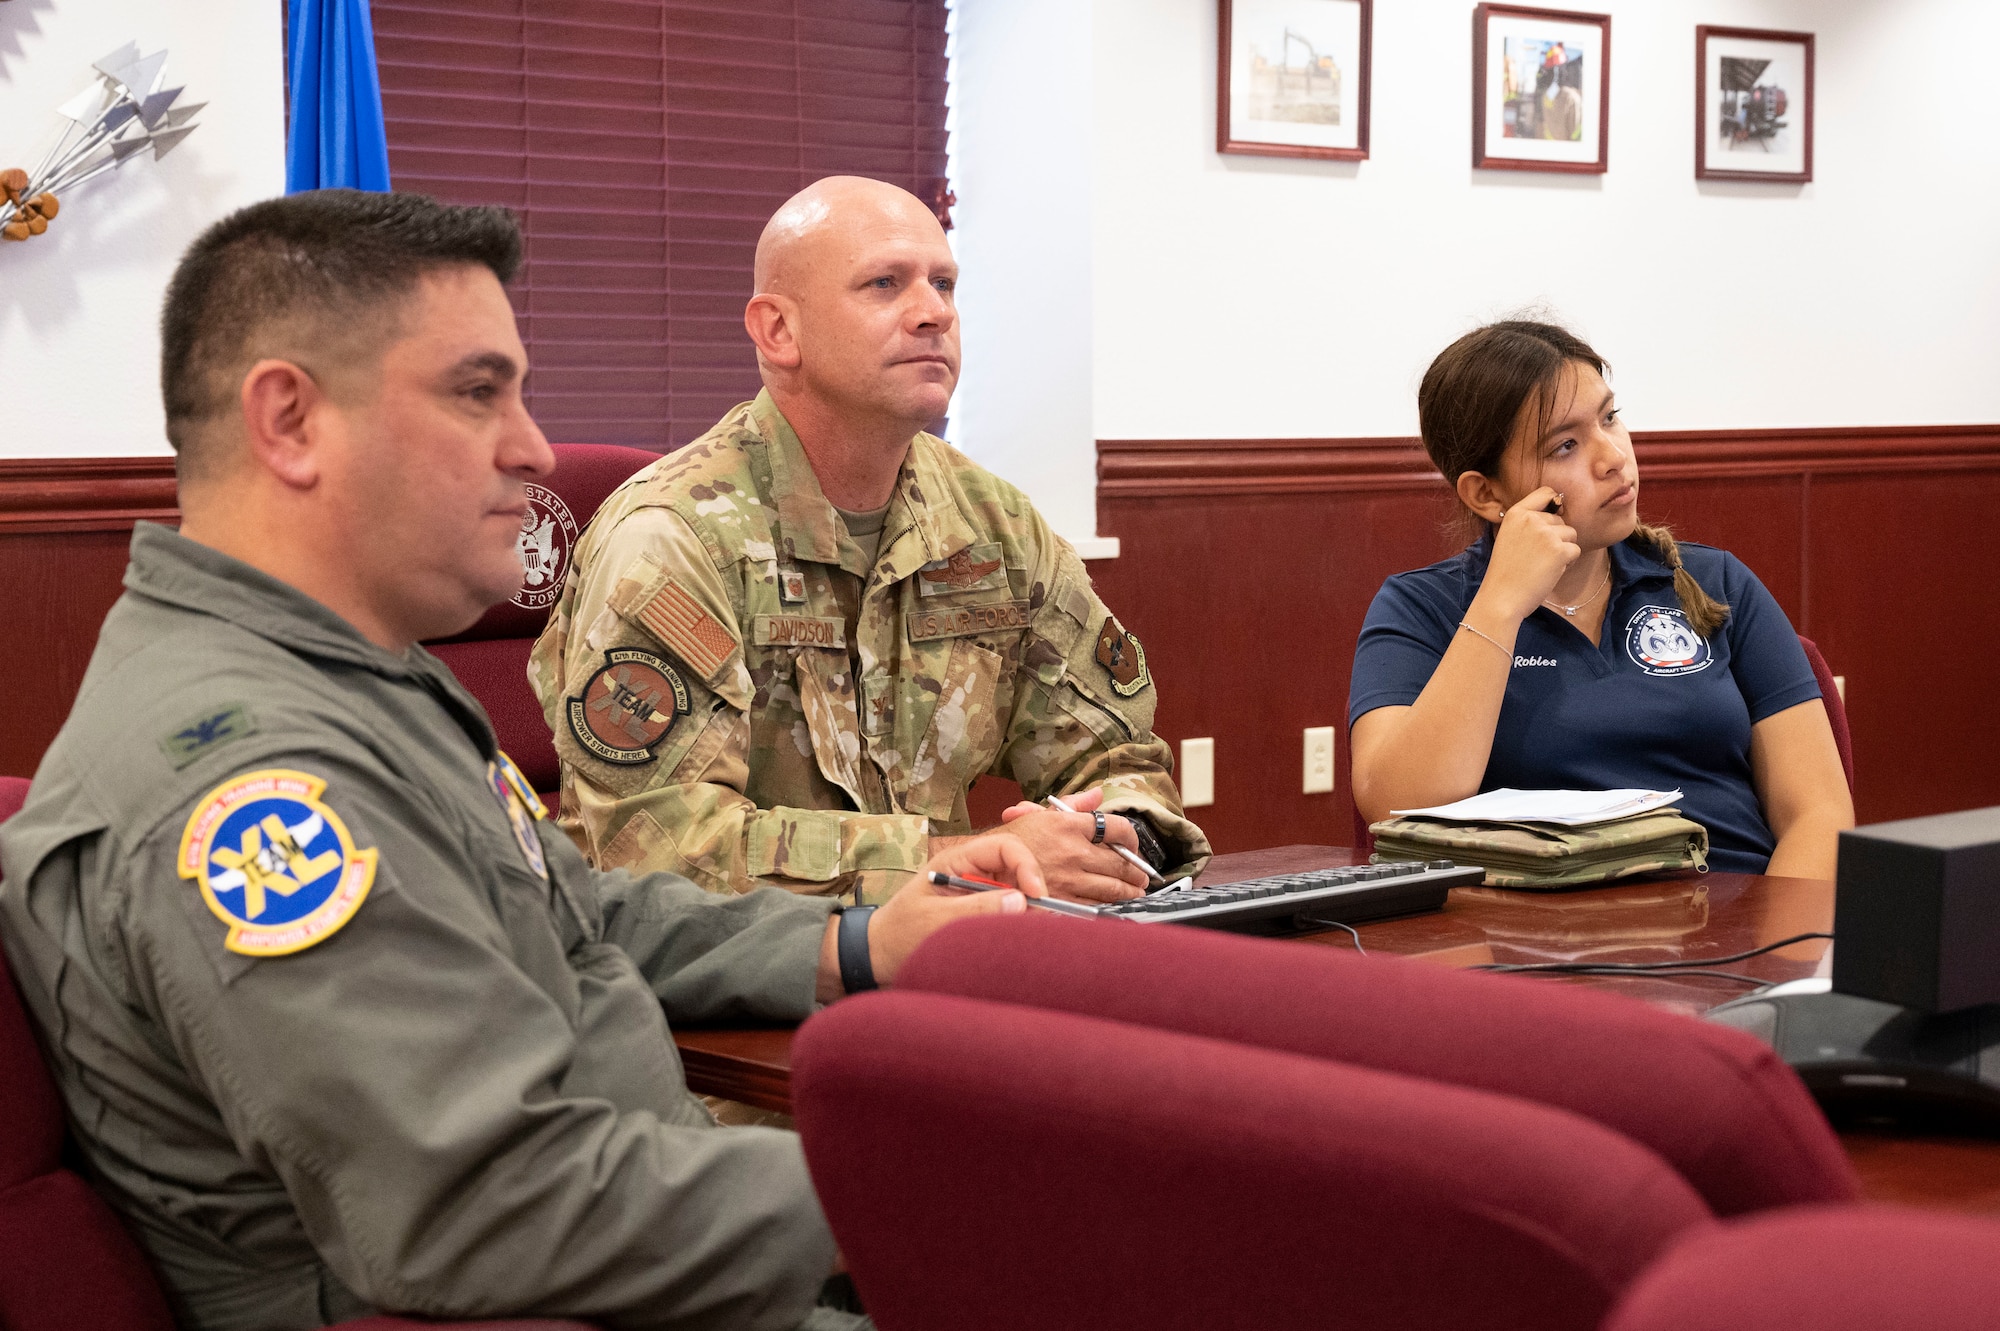 Carla Robles (right), Del Rio High School Junior Reserve Officer’s Training Corps cadet, joins Col. Kevin Davidson (middle), 47th Flying Training Wing commander, and Col. Andrew Katz (left), 47th Flying Training Wing vice commander, to a staff meeting at Laughlin Air Force Base, Texas, June 7, 2023. Robles joined Davidson and other leaders to discuss the many responsibilities of ensuring mission success and Airmen professional development. (U.S. Air Force photo by Airman 1st Class Kailee Reynolds)